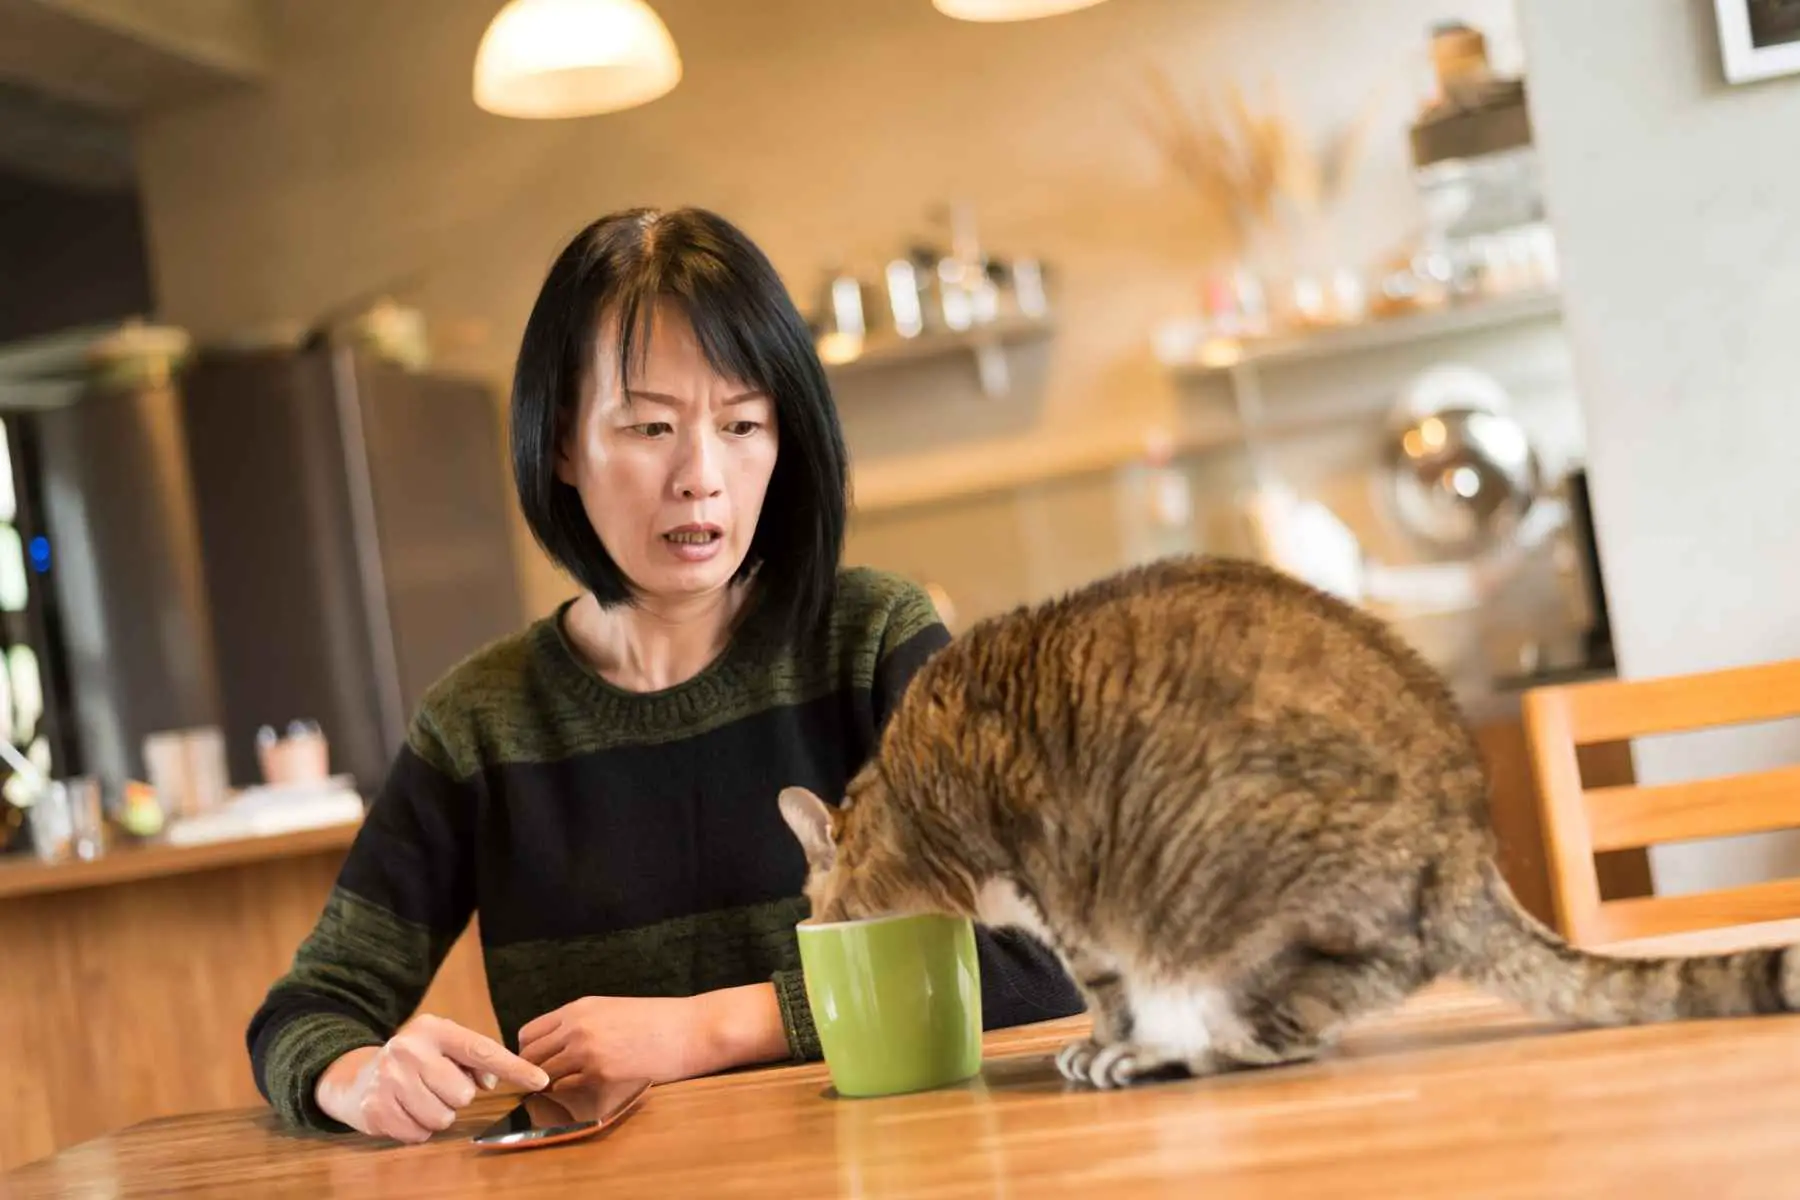 Woman looking disgusted when her cat drinks out of her cup